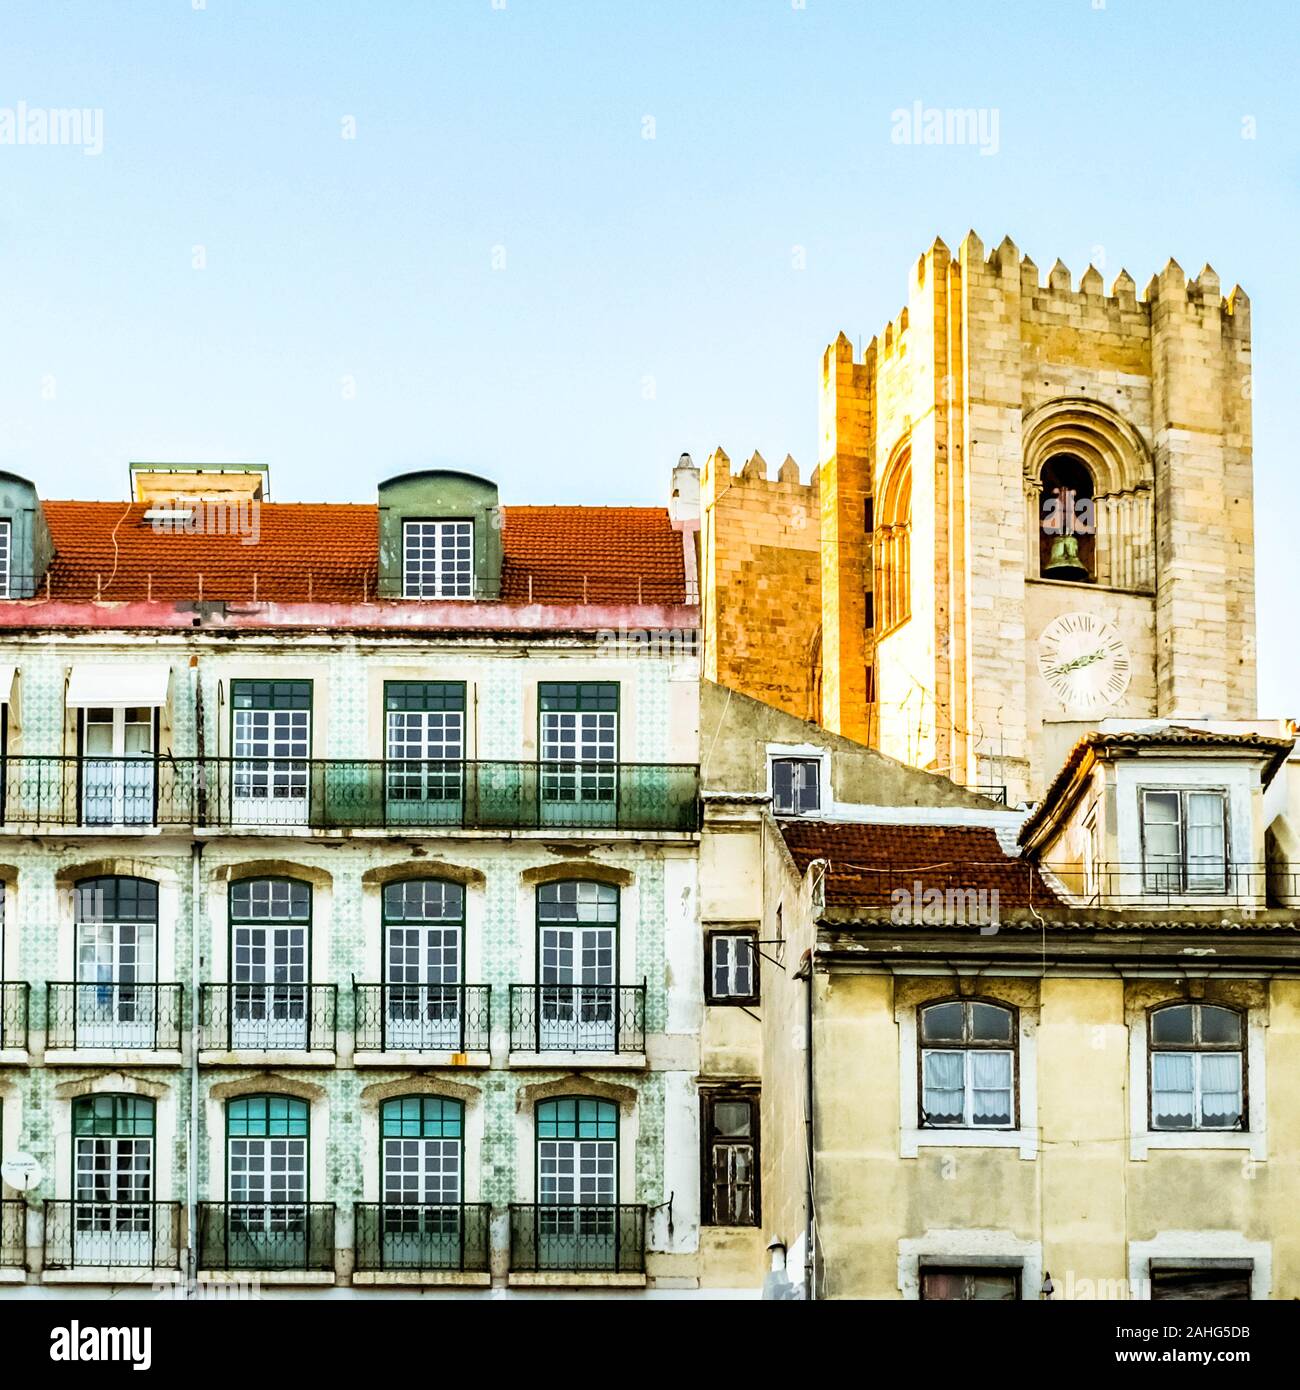 Pombaline style houses in Lisbon and bell towers of Lisbon Cathedral illuminated by sunset. Stock Photo